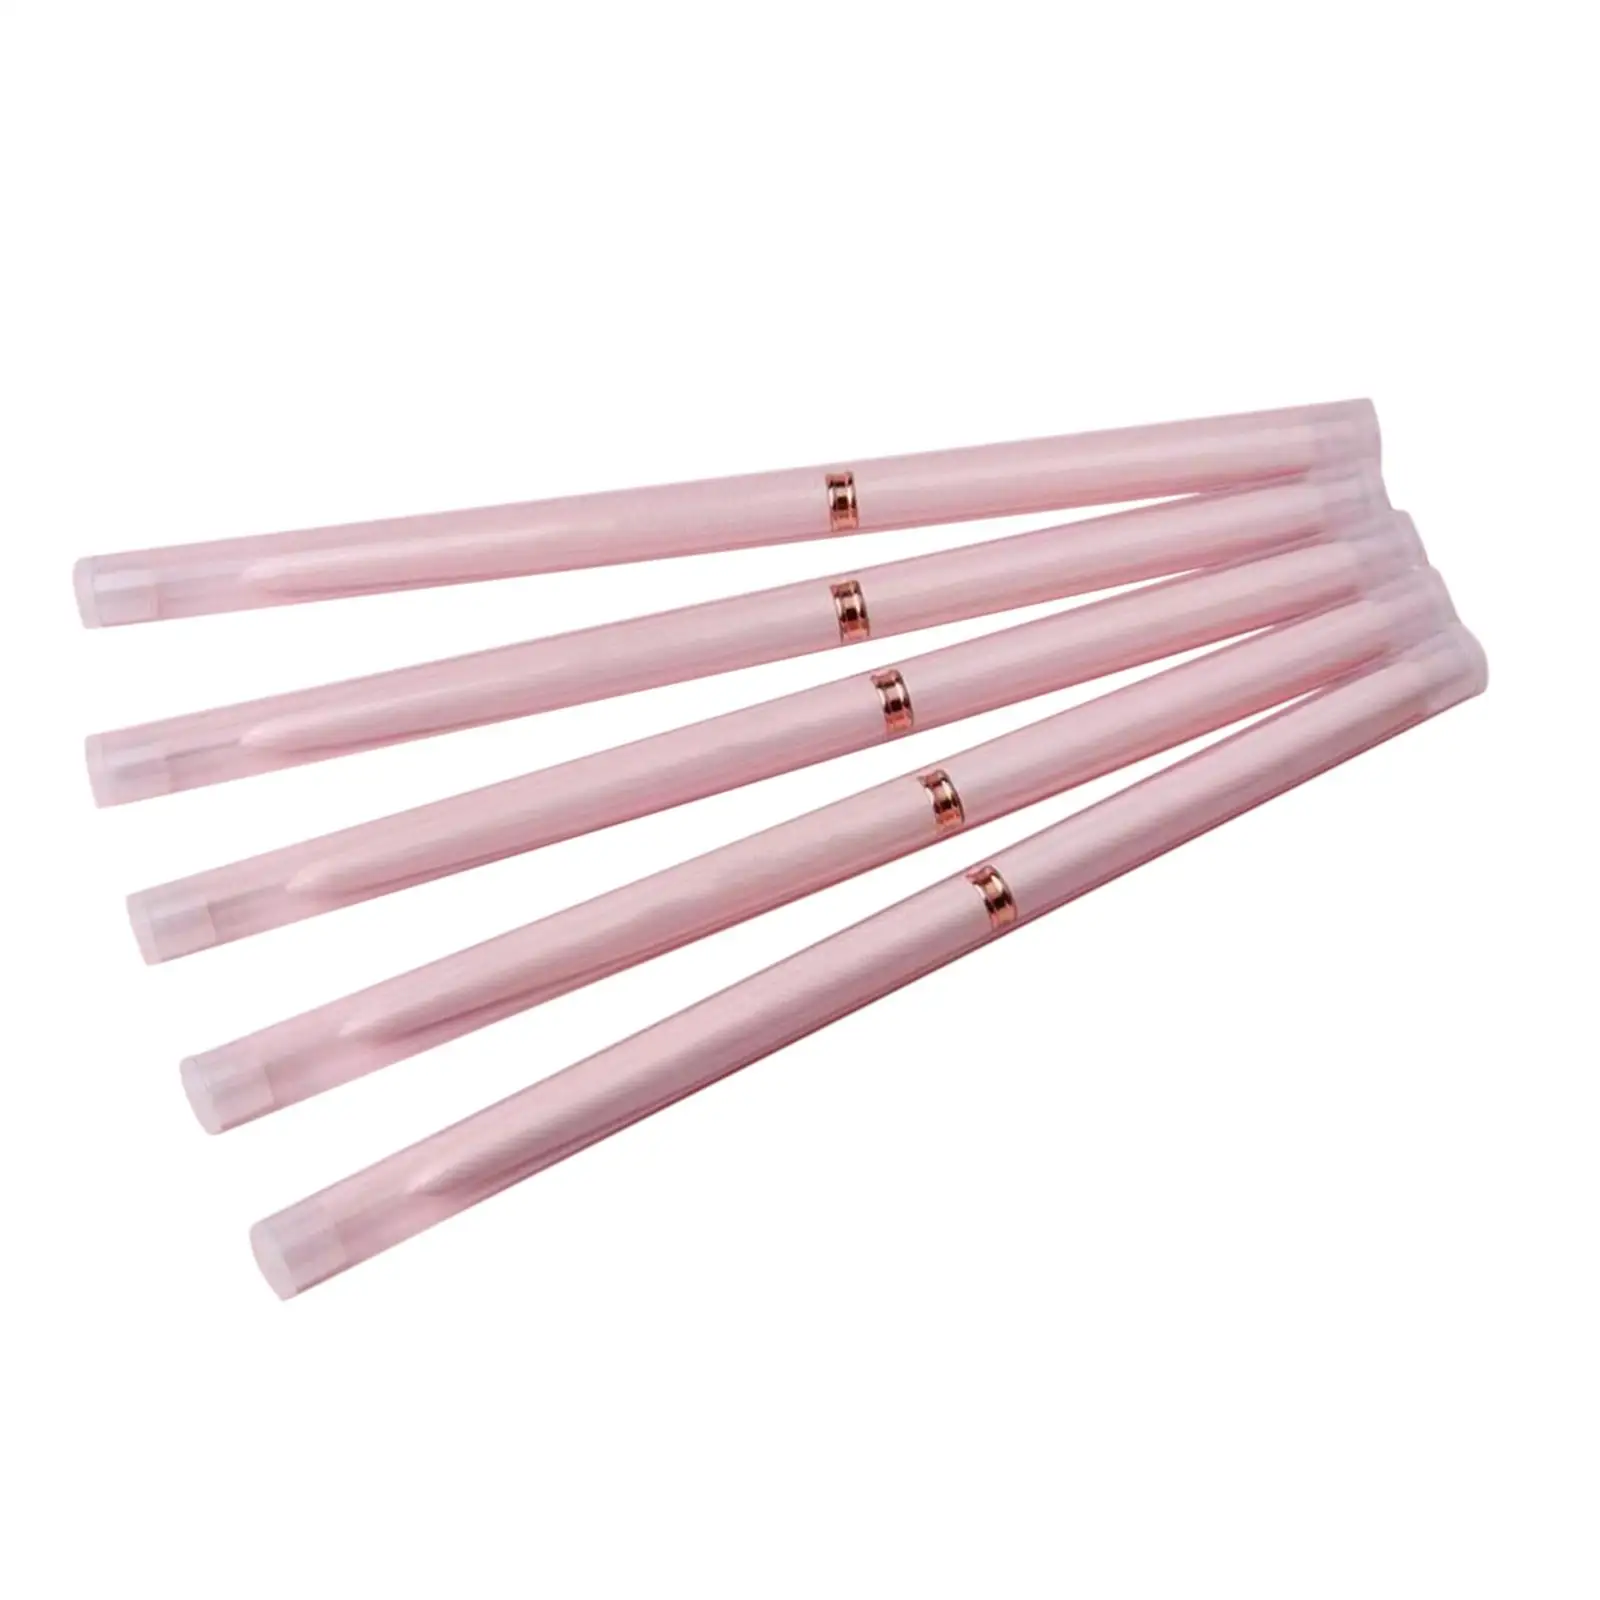 5 Pieces Nail Art Liner Brush for Delicate Coloring DIY Professional Design